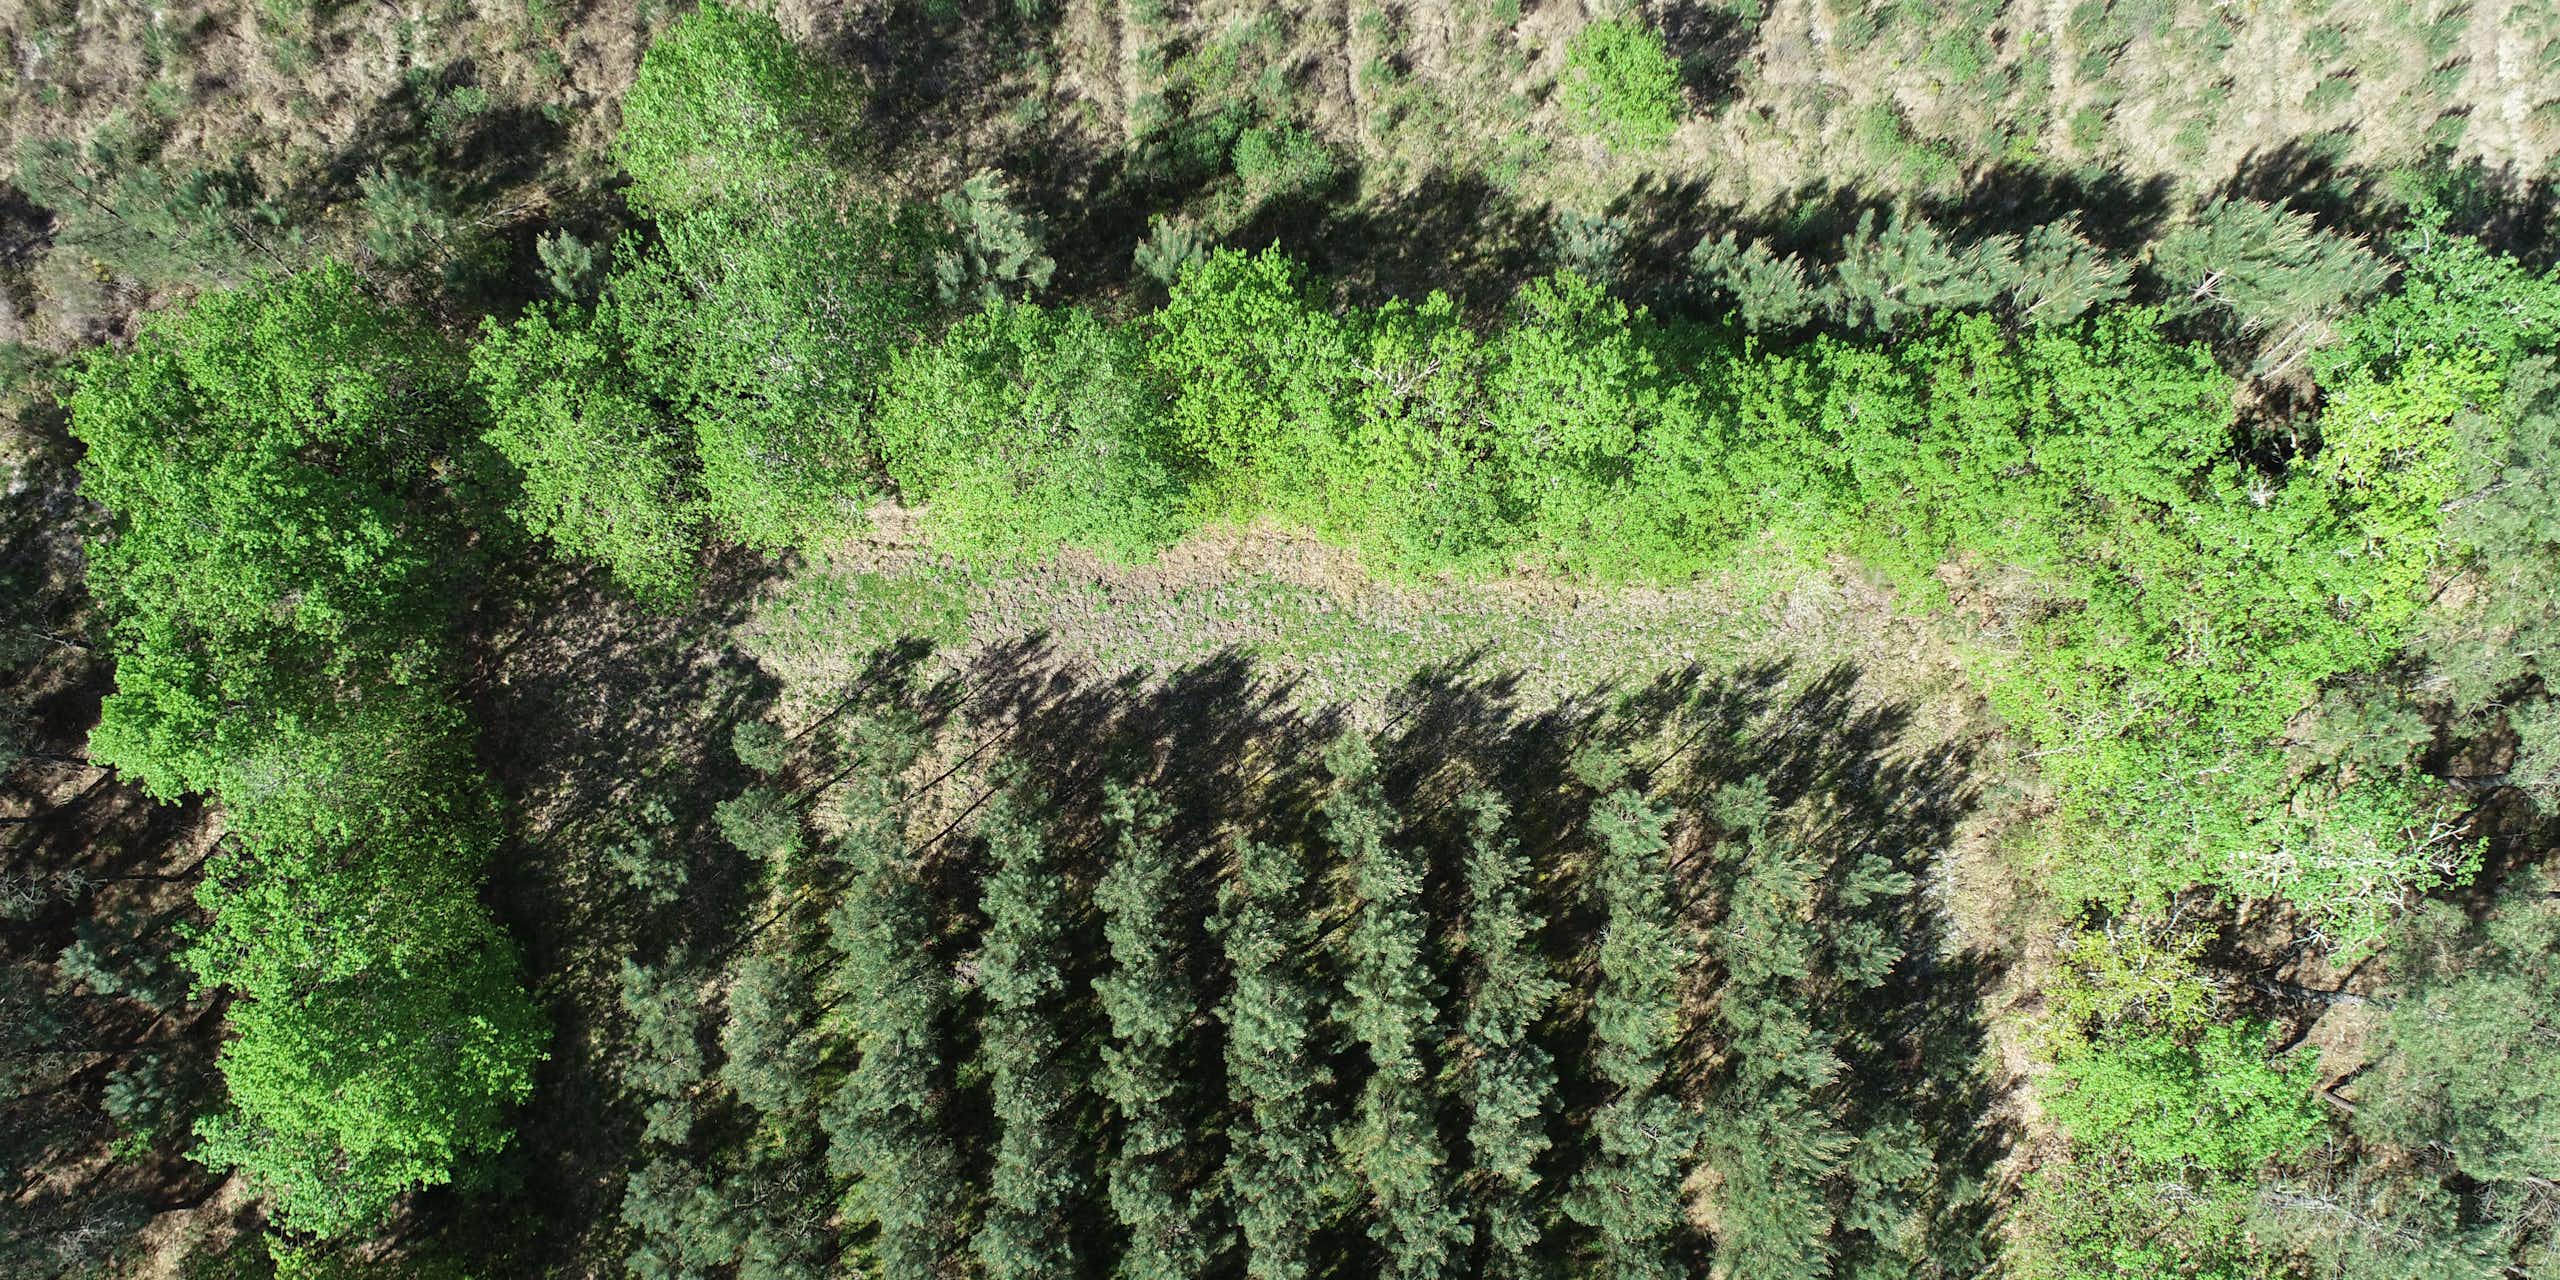 A pine plantation and hedgerow as seen from an unmanned aerial vehicle.